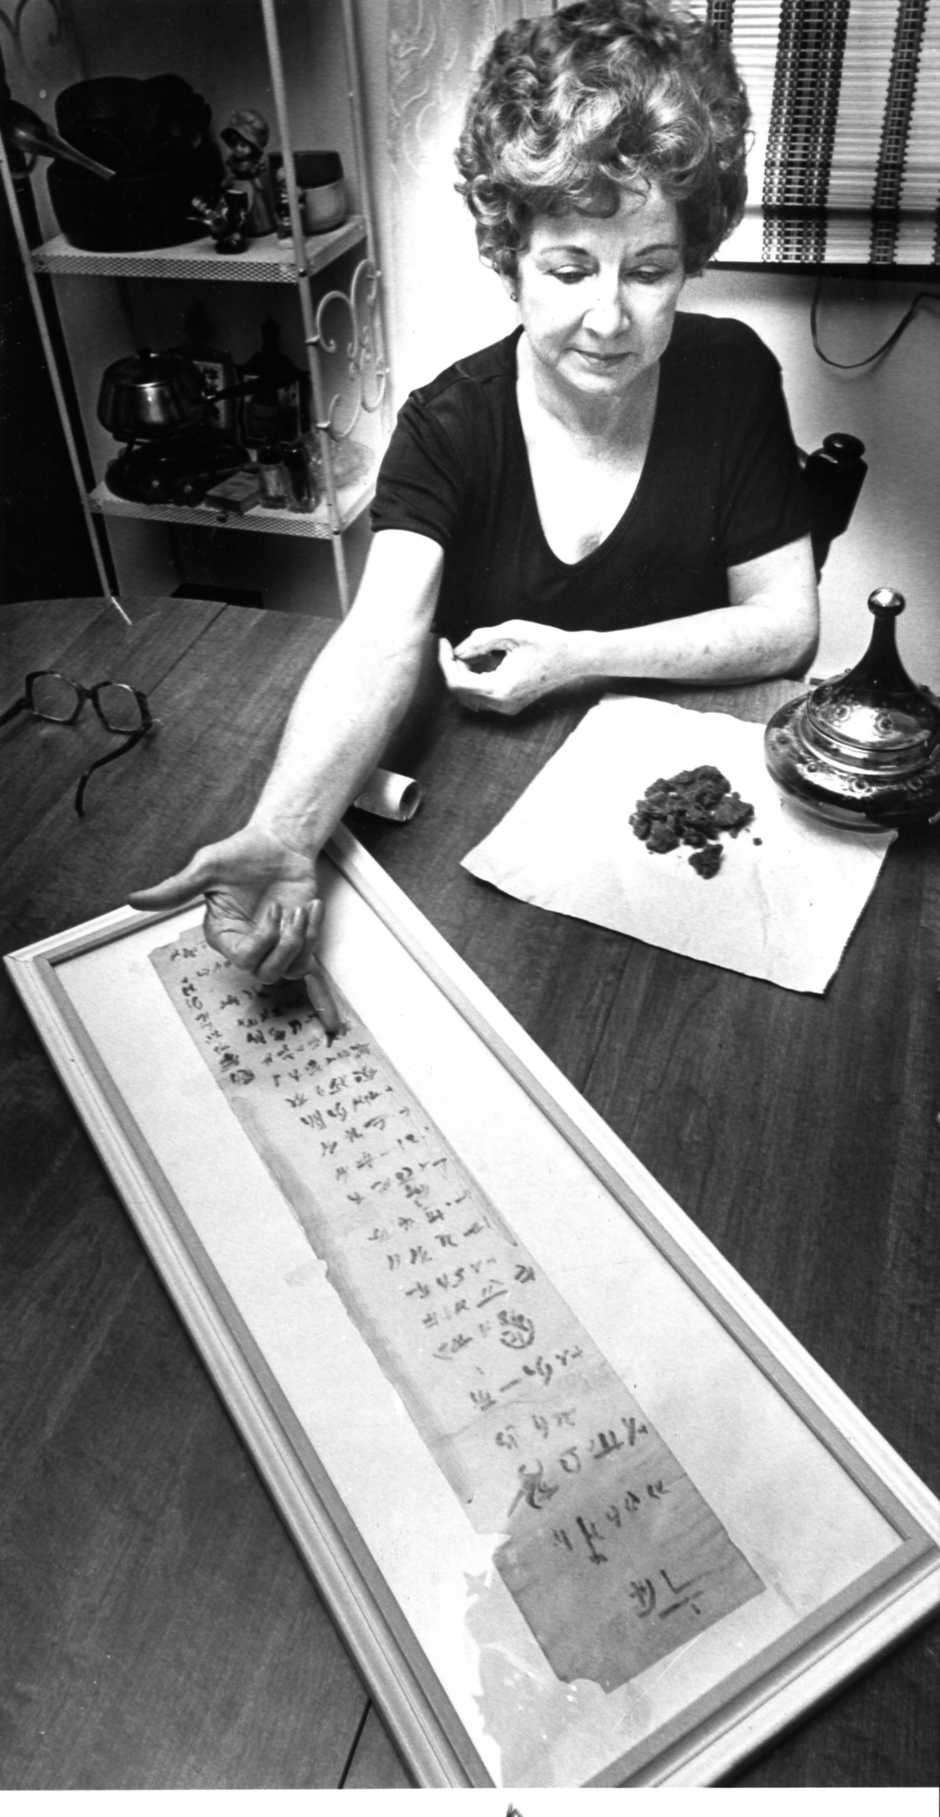 October 7, 1980: Elgar Brom shows scroll and blue dust she claims she received during a close encounter with aliens from outer space. 